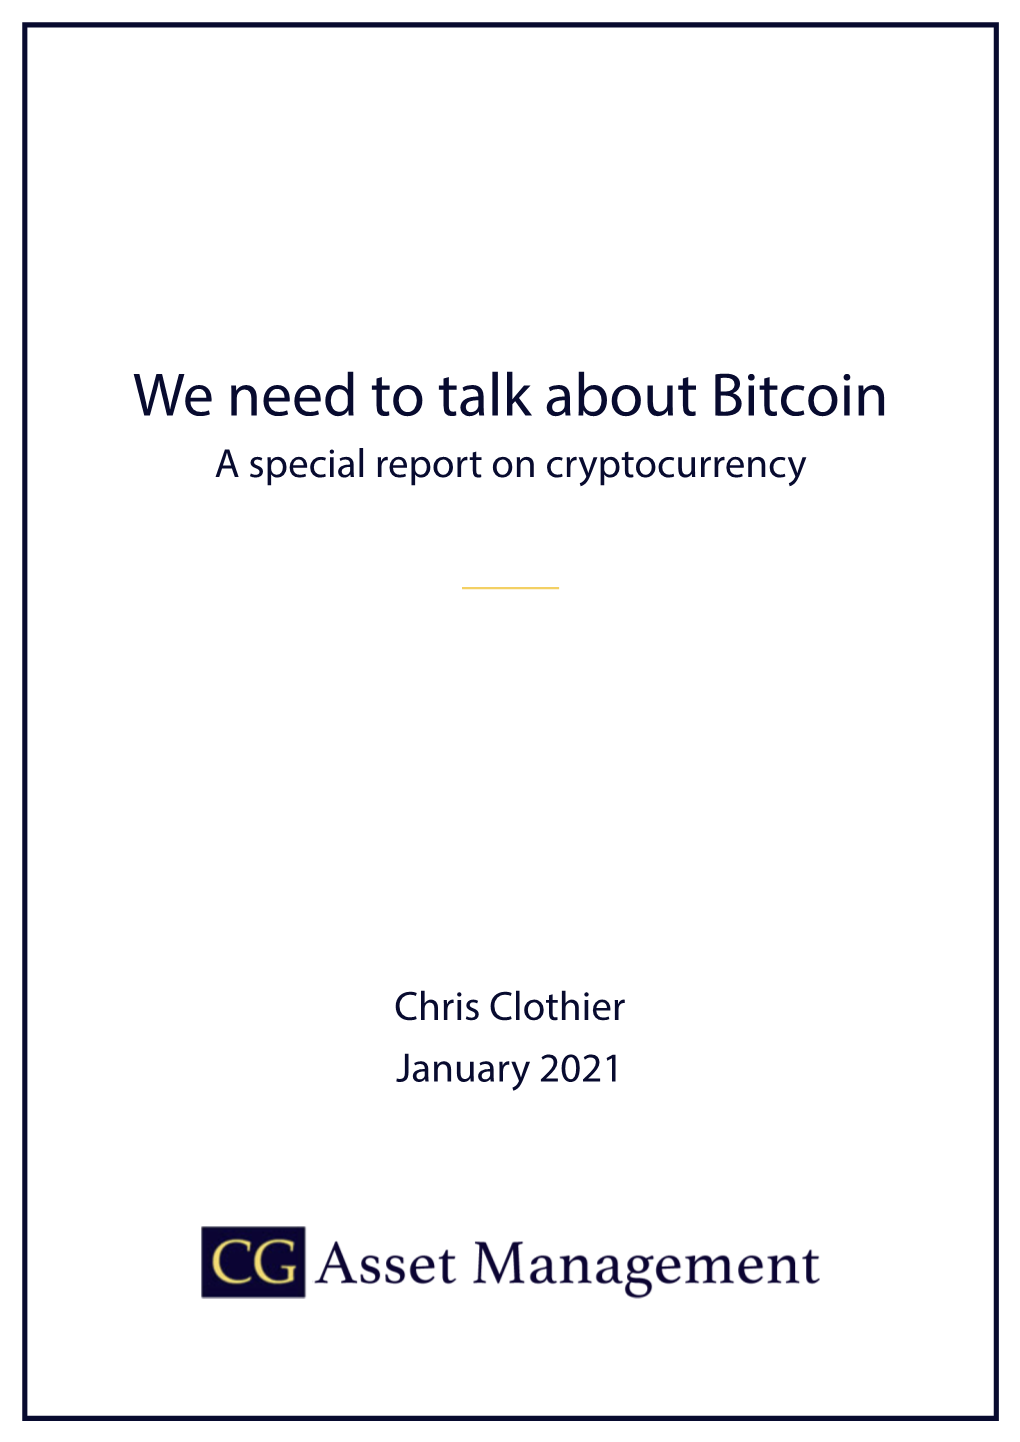 We Need to Talk About Bitcoin a Special Report on Cryptocurrency